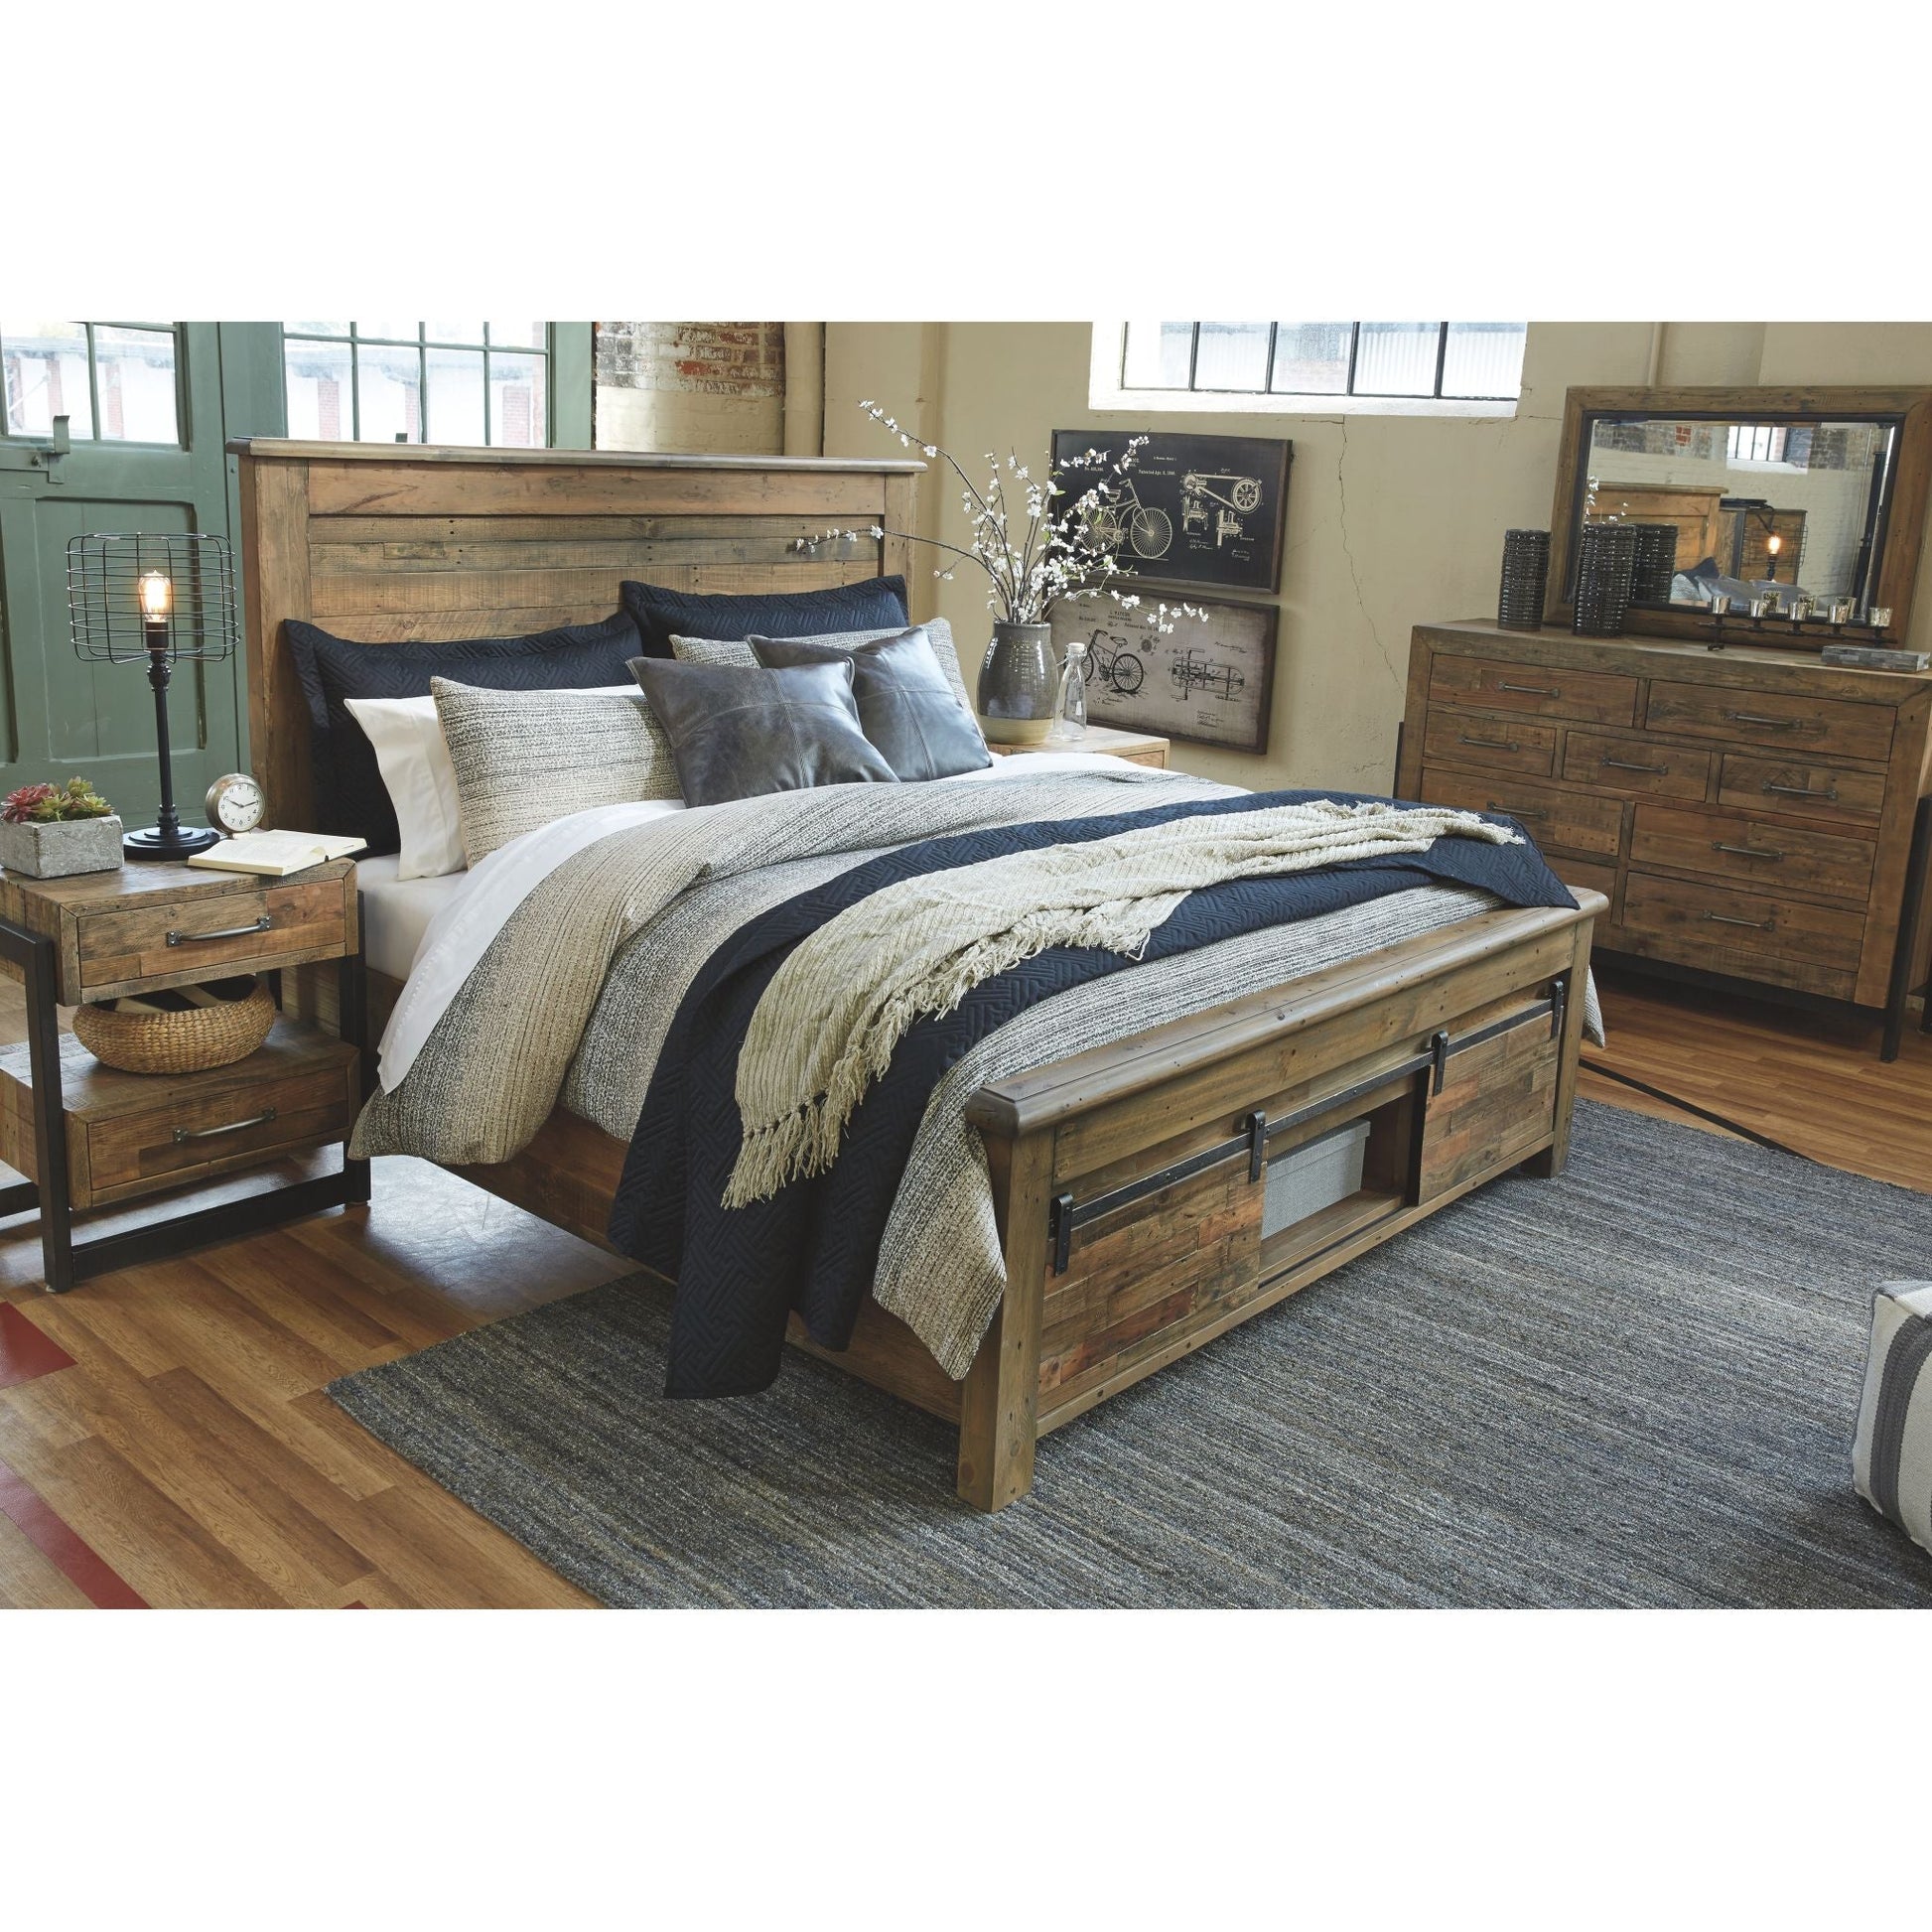 Sommerford 3 Piece Bed with Storage